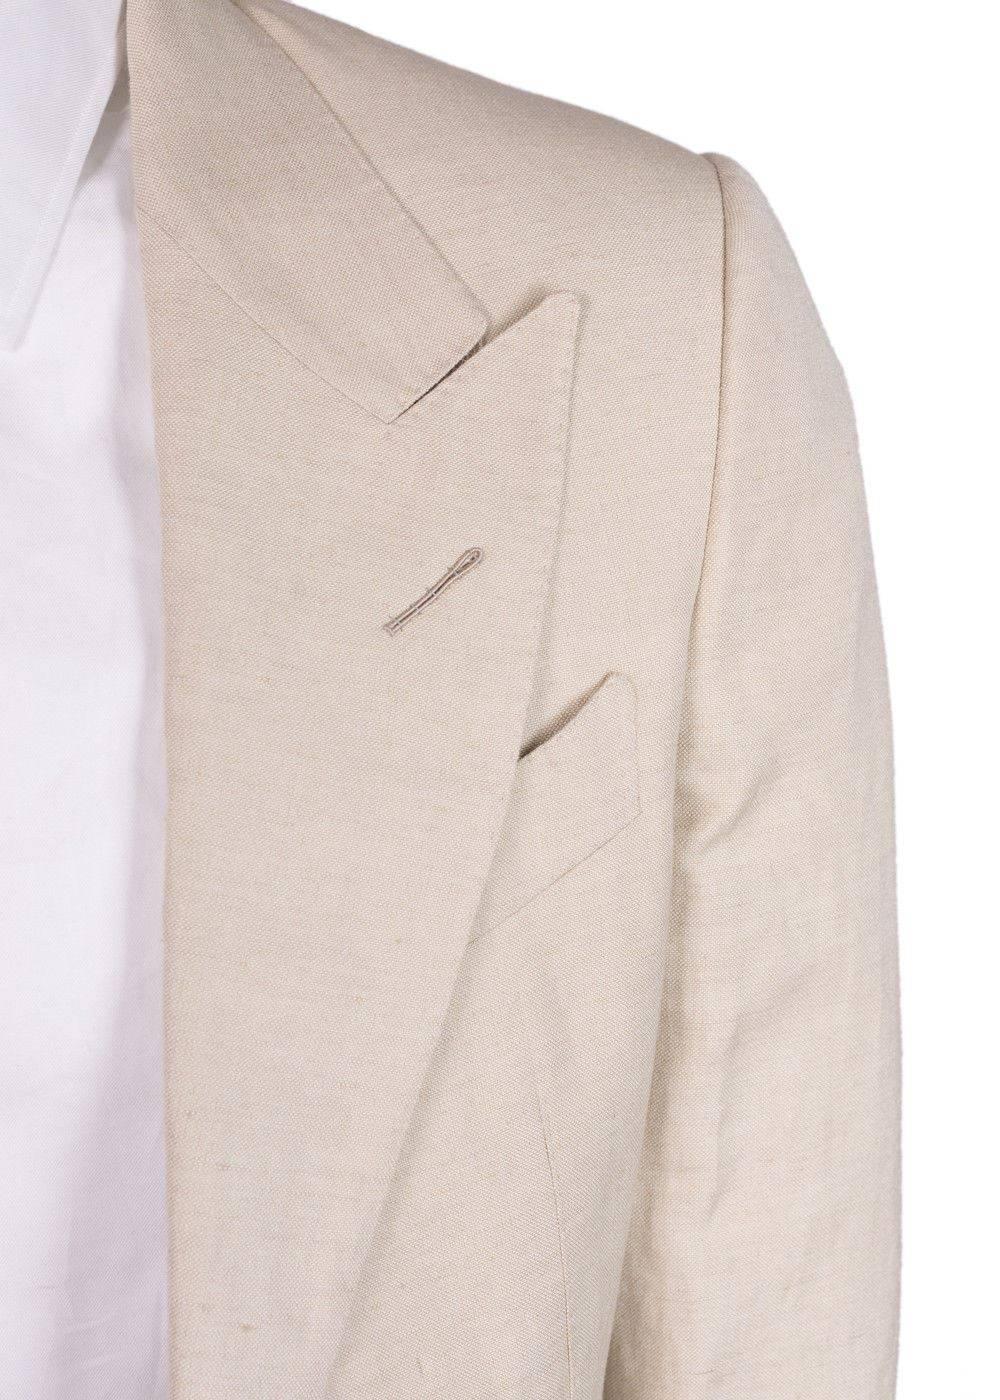 Brand New Tom Ford Two Piece Suit
Original Tags & Hanger Included
Retails In-Store & Online for $4430
Size IT 46 R / US 36

Lend a hint of effortless sophistication to your formal repertoire courtesy of Tom Ford's two piece suit. Crafted from the